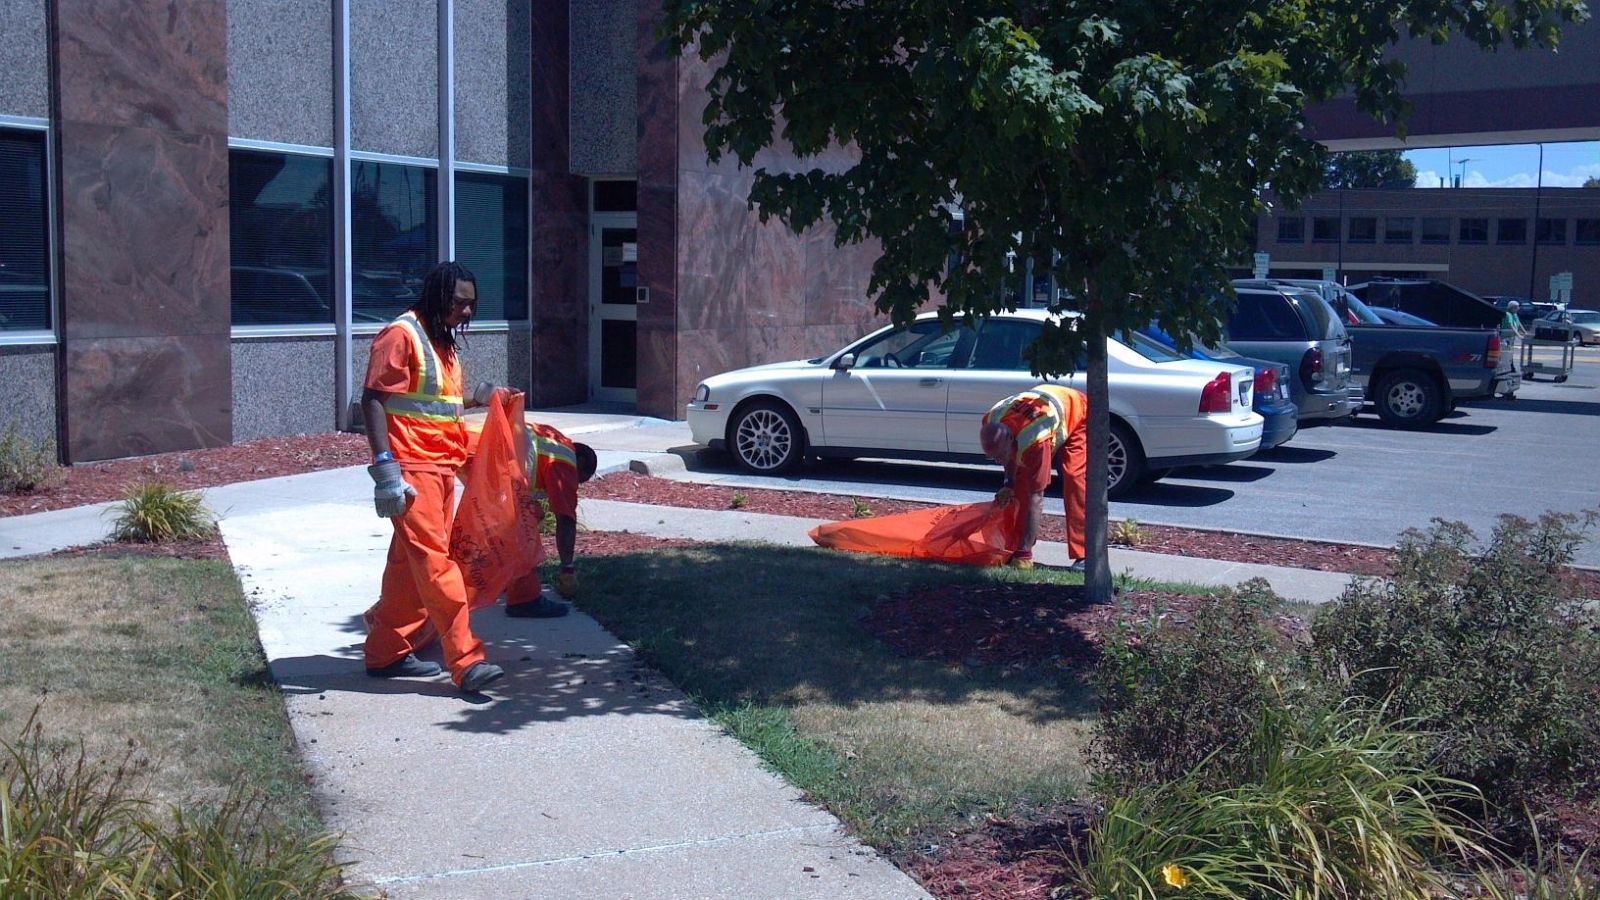 Inmates cleaning up weeds outside the courthouse